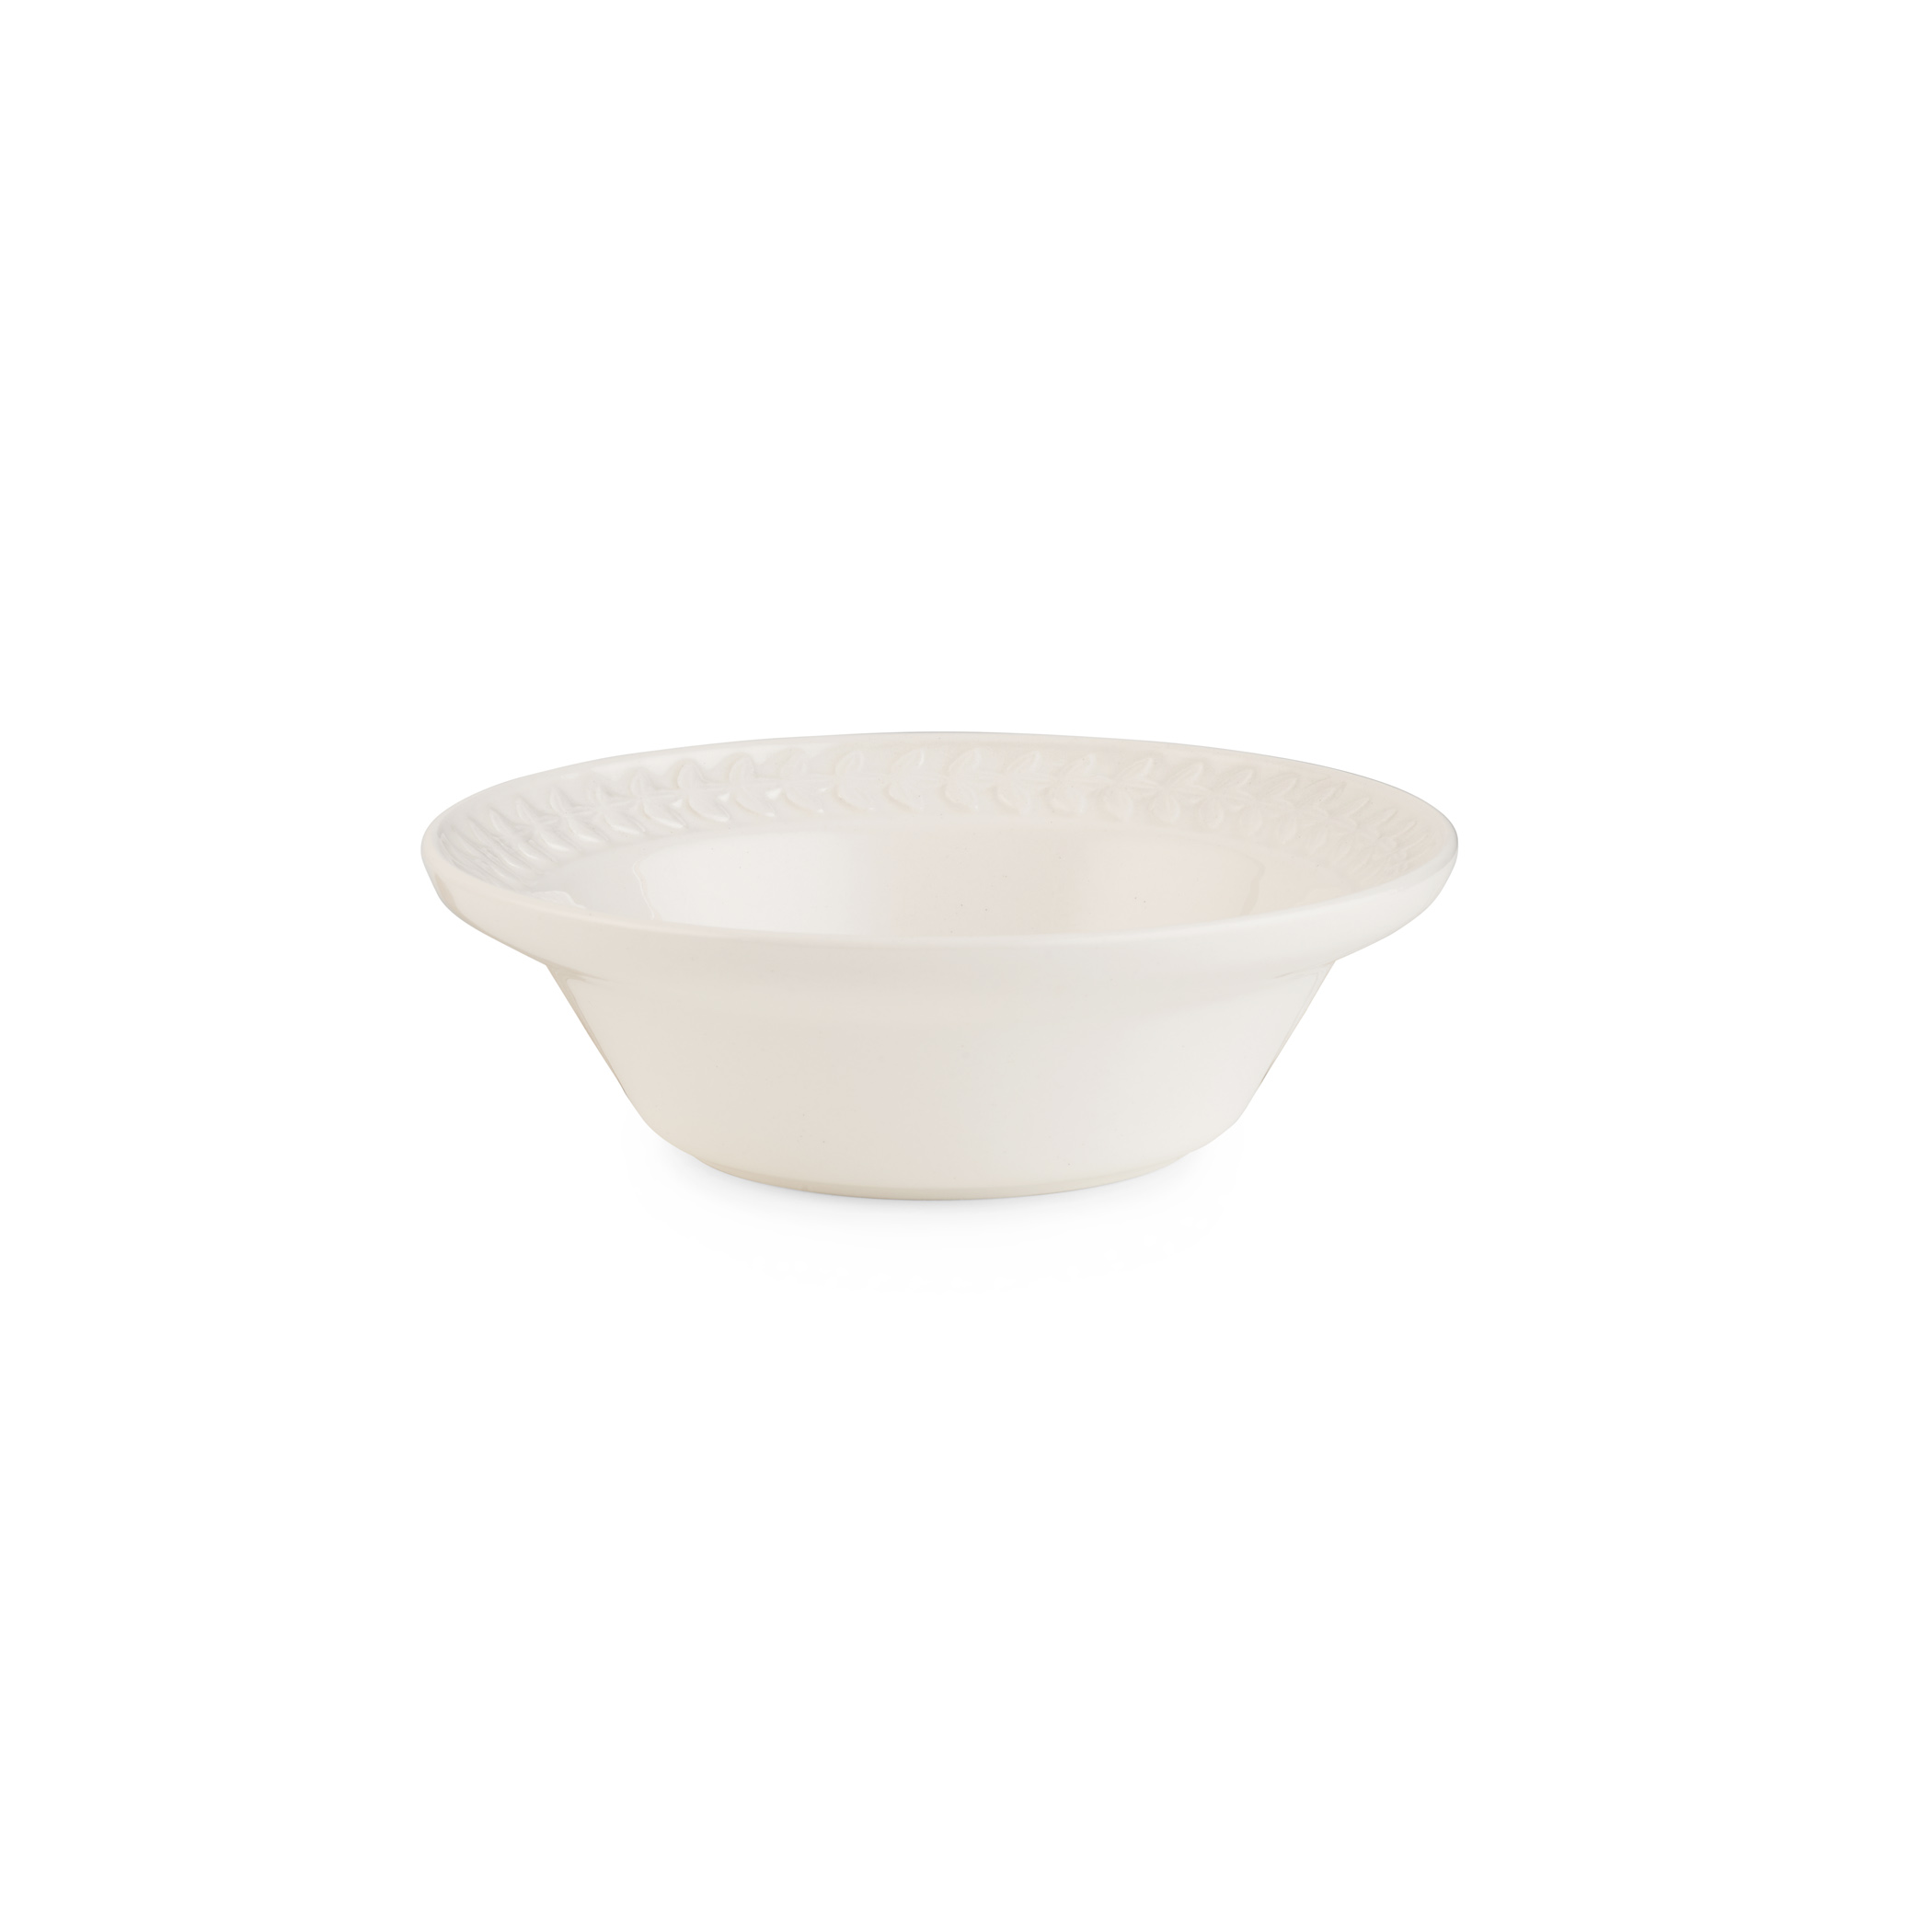 Botanic Garden Harmony Papilio Opal 6 Inch Cereal Bowl (Knysna Lily) image number null